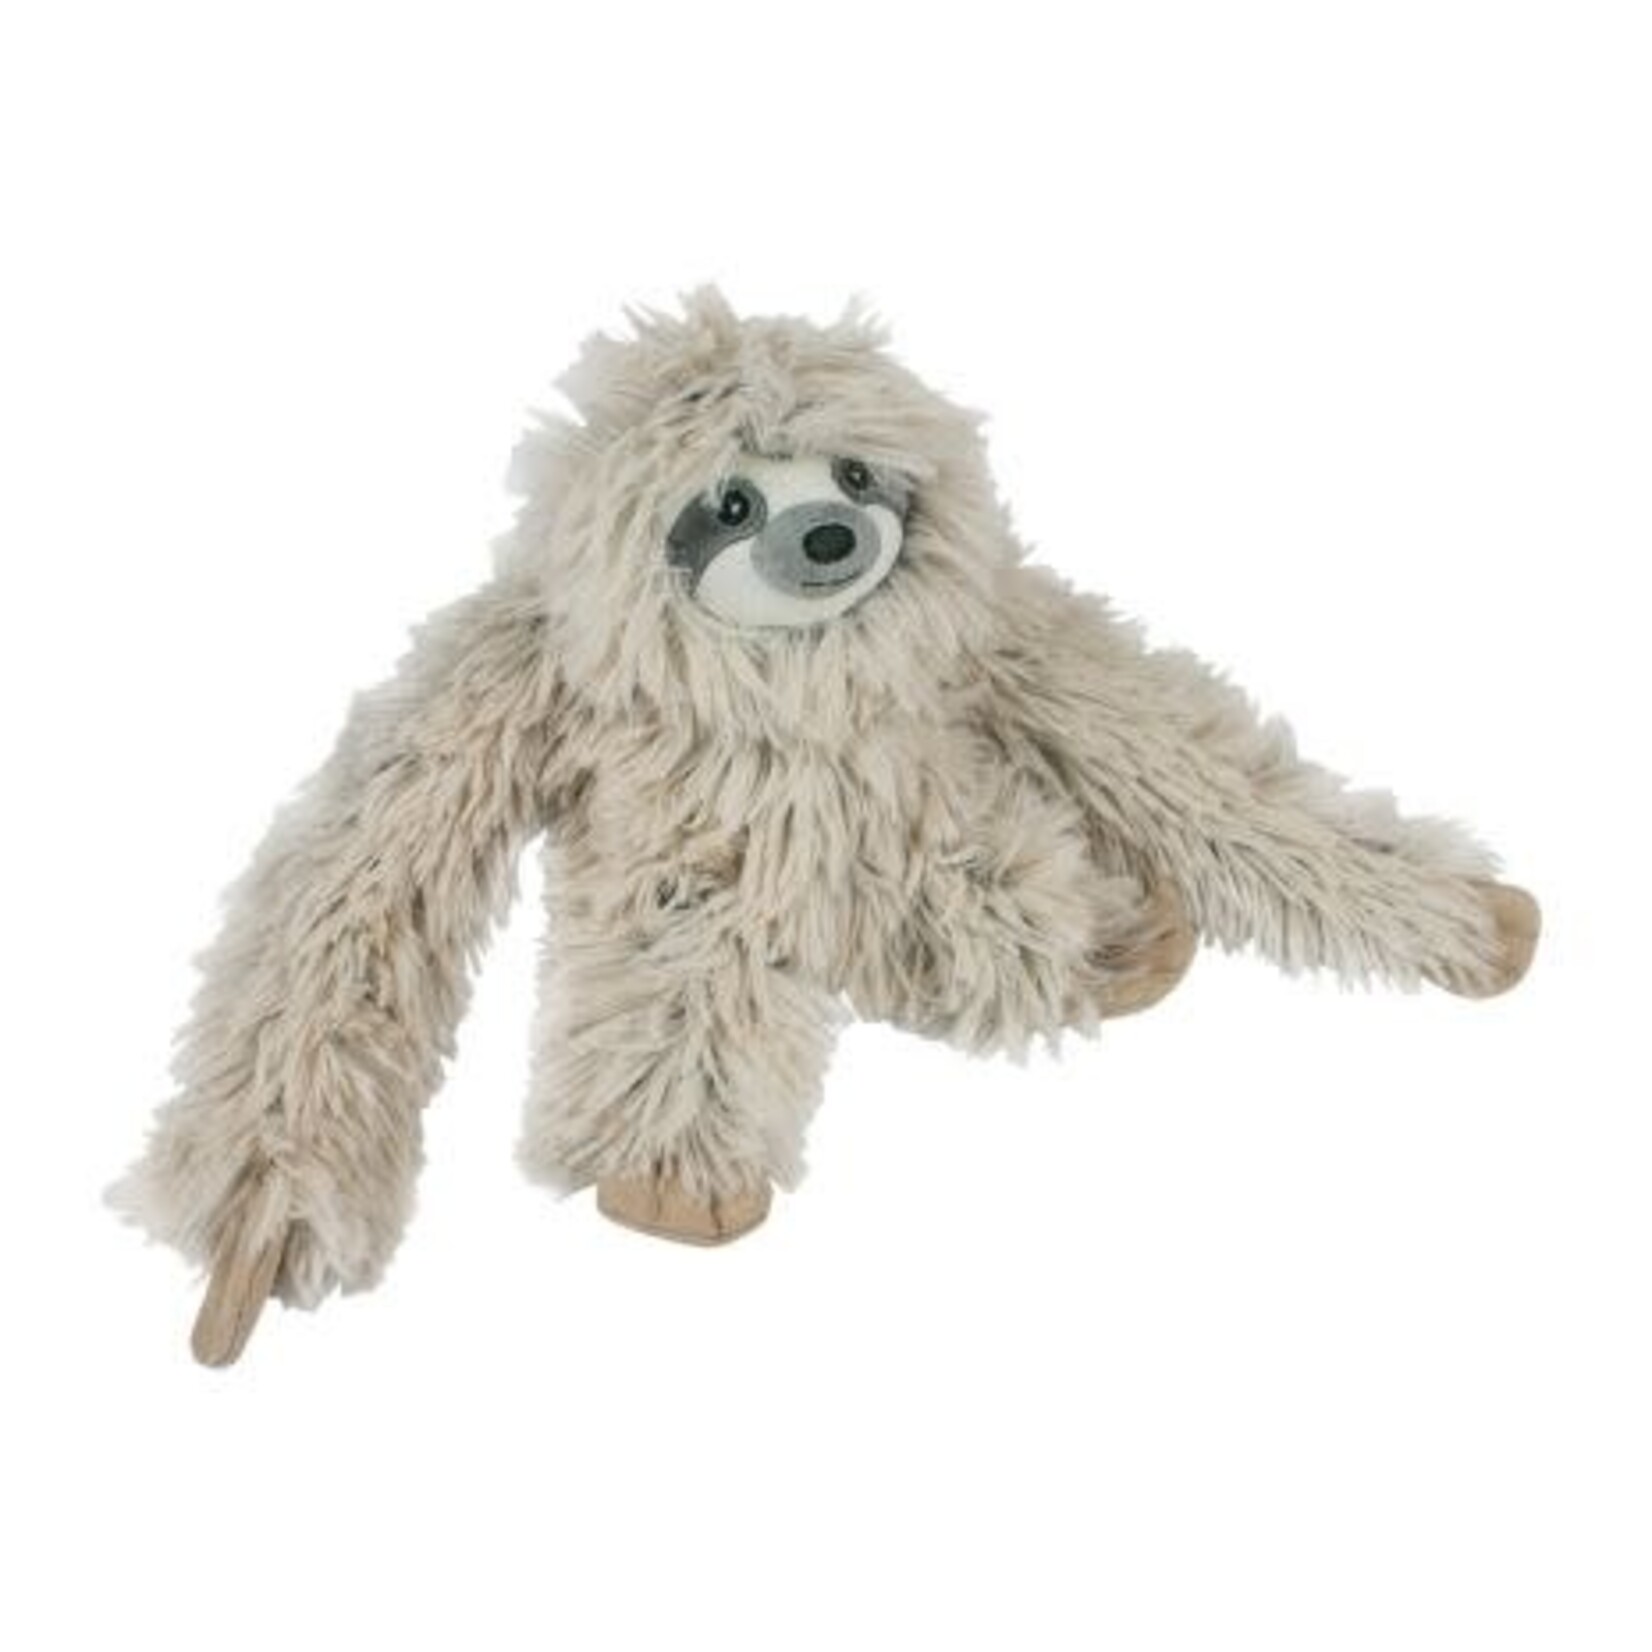 Tall Tails Tall Tails Sloth w/Squeak Plush Rope Toy 16"